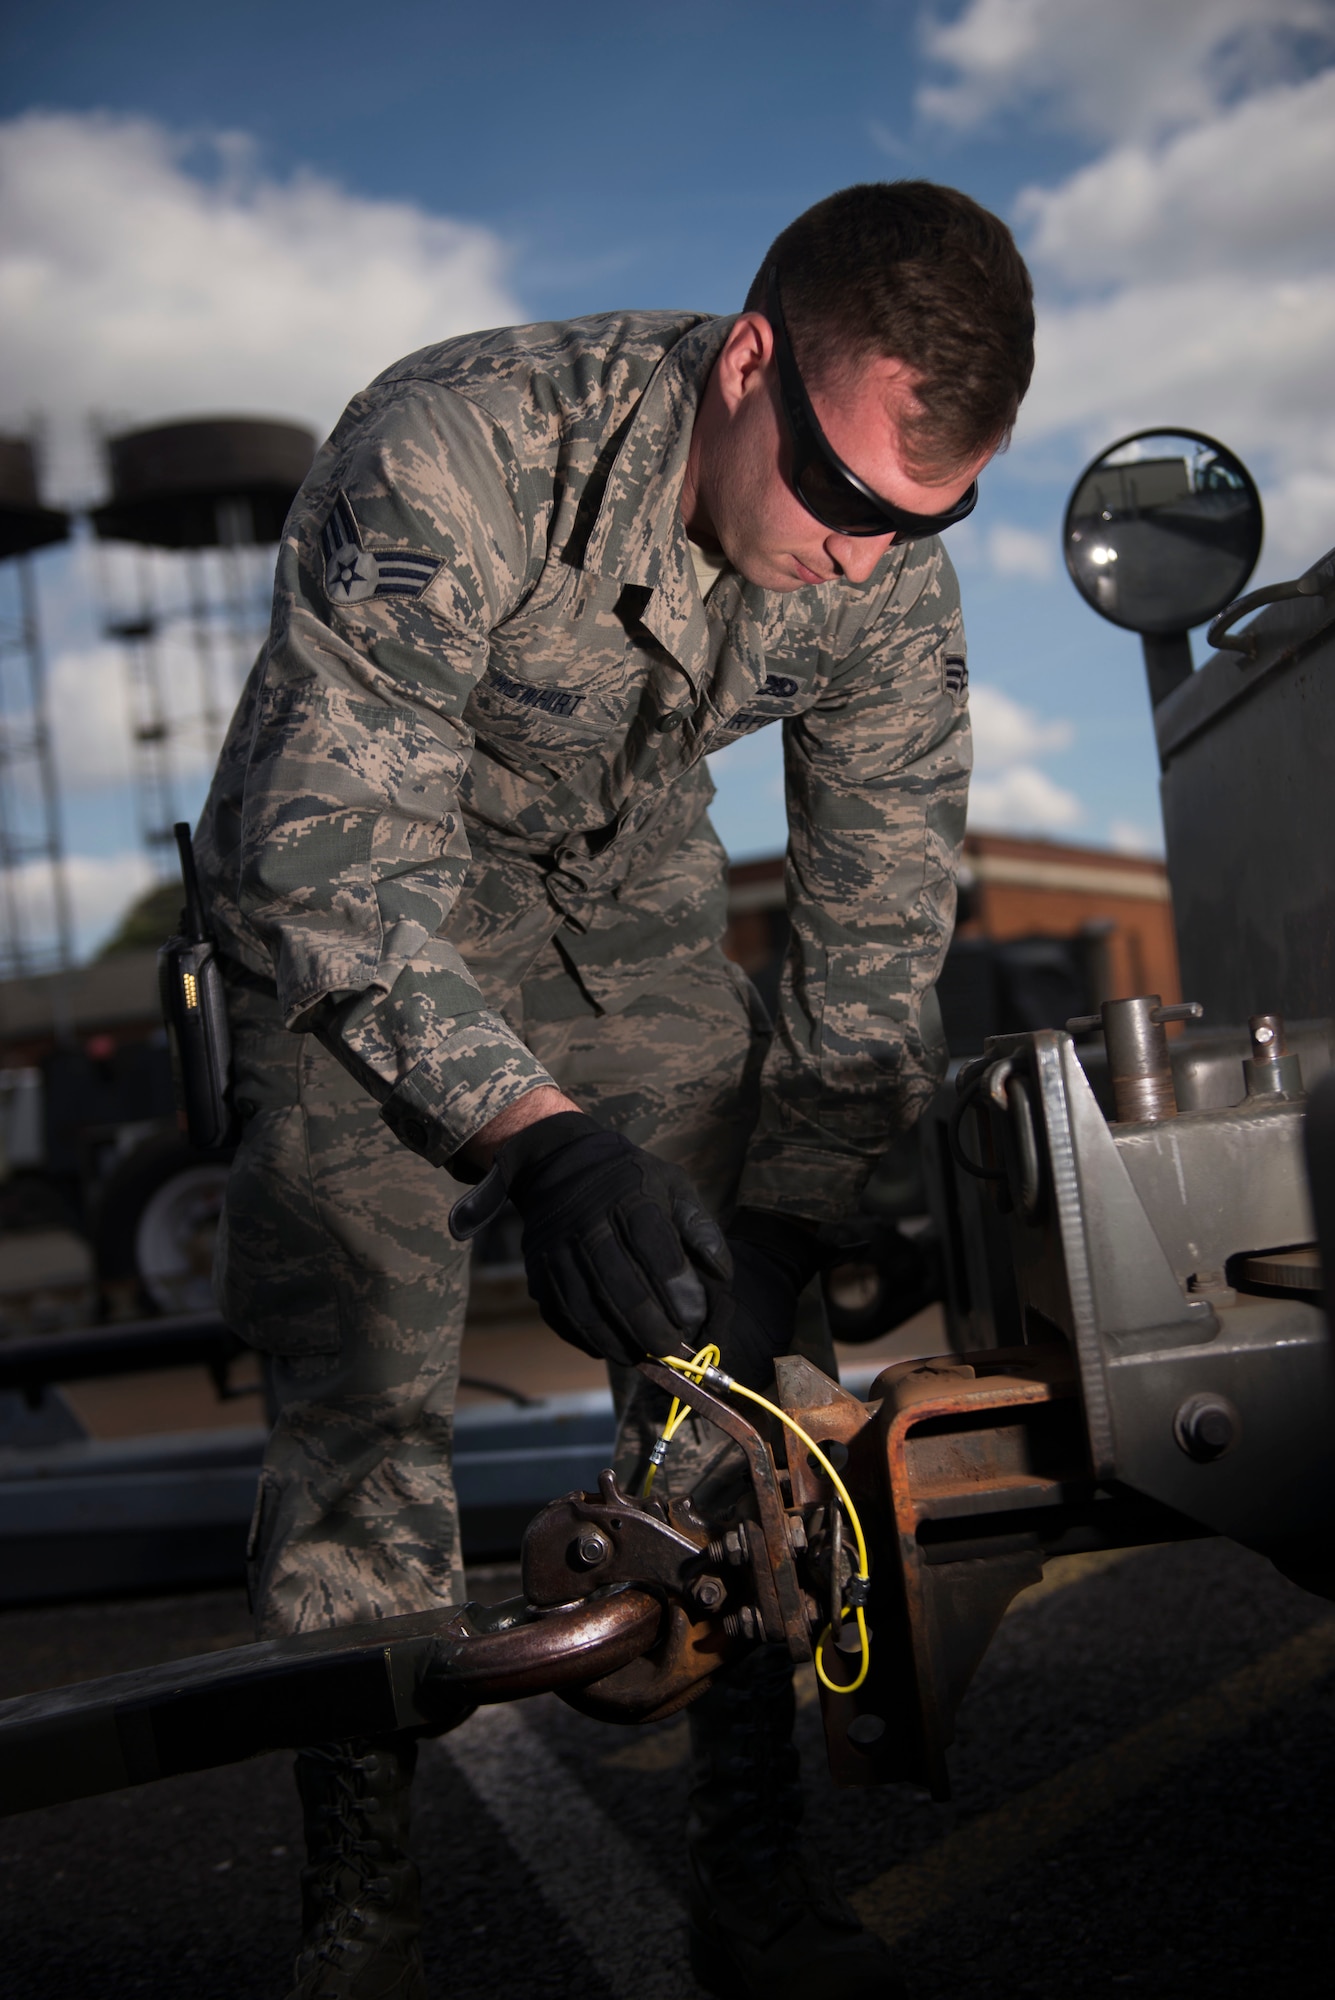 U.S. Air Force Senior Airman Michael McWhirt, 100th Maintenance Squadron aerospace ground equipment journeyman, attaches a diesel generator to a truck to bring to out to the flightline to power a KC-135 Stratotanker at RAF Mildenhall, England, May 8, 2018. A series of inspections must be completed before any aircraft can use the generator, which are an instrumental part in powering the KC-135 Stratotankers on the ground. (U.S. Air Force photo by Airman 1st Class Alexandria Lee)